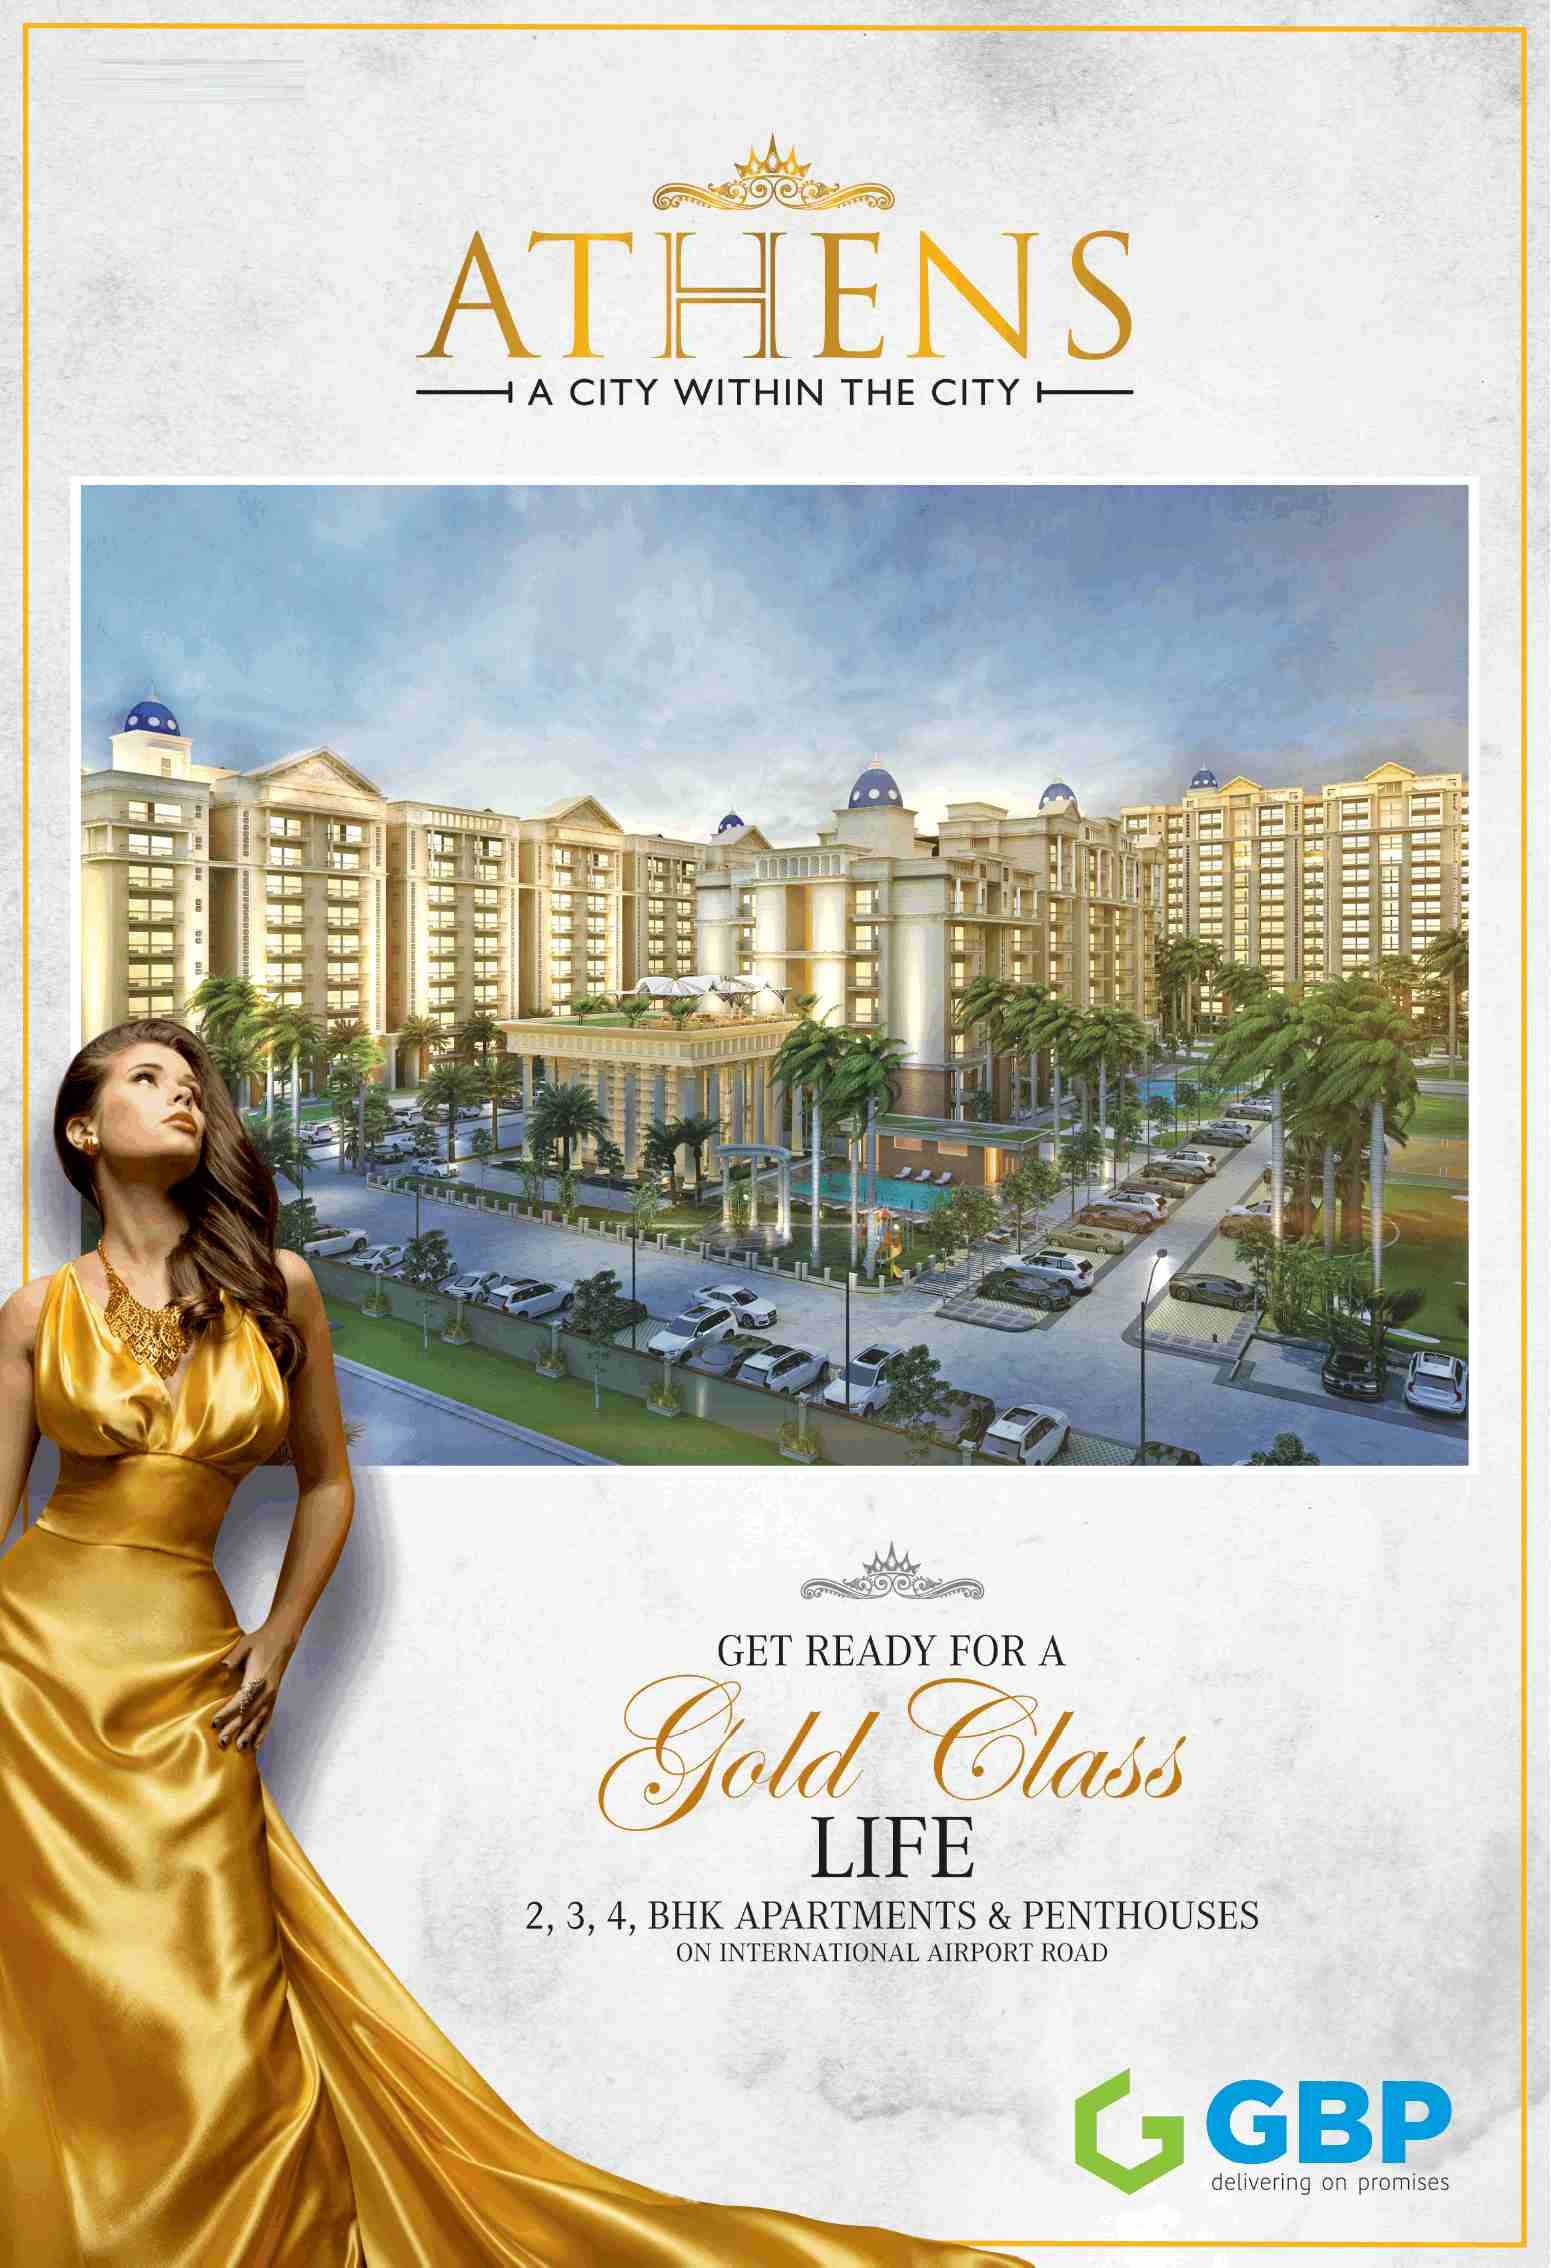 Live a gold class life at GBP Athens in Chandigarh